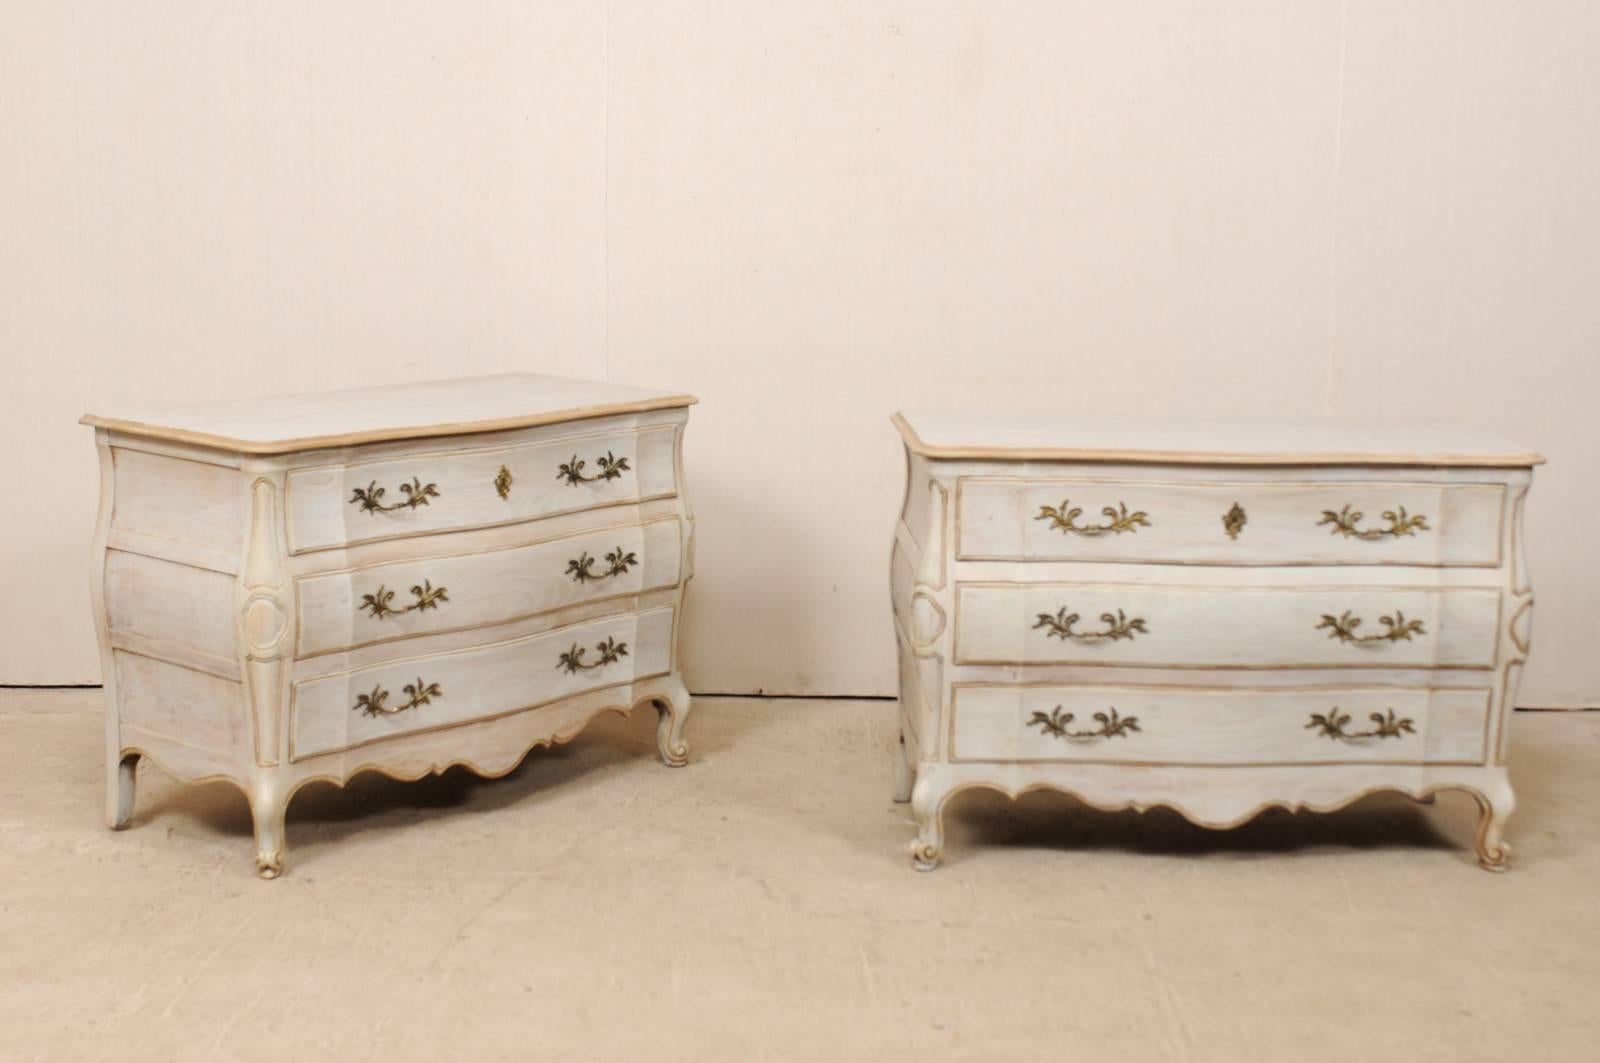 A pair of American vintage painted wood chest of drawers. This pair of American chests from the mid-20th century feature subtle curvy bombé style cases, scalloped skirt along three sides, decorated carvings down each side post, and paneled sides.